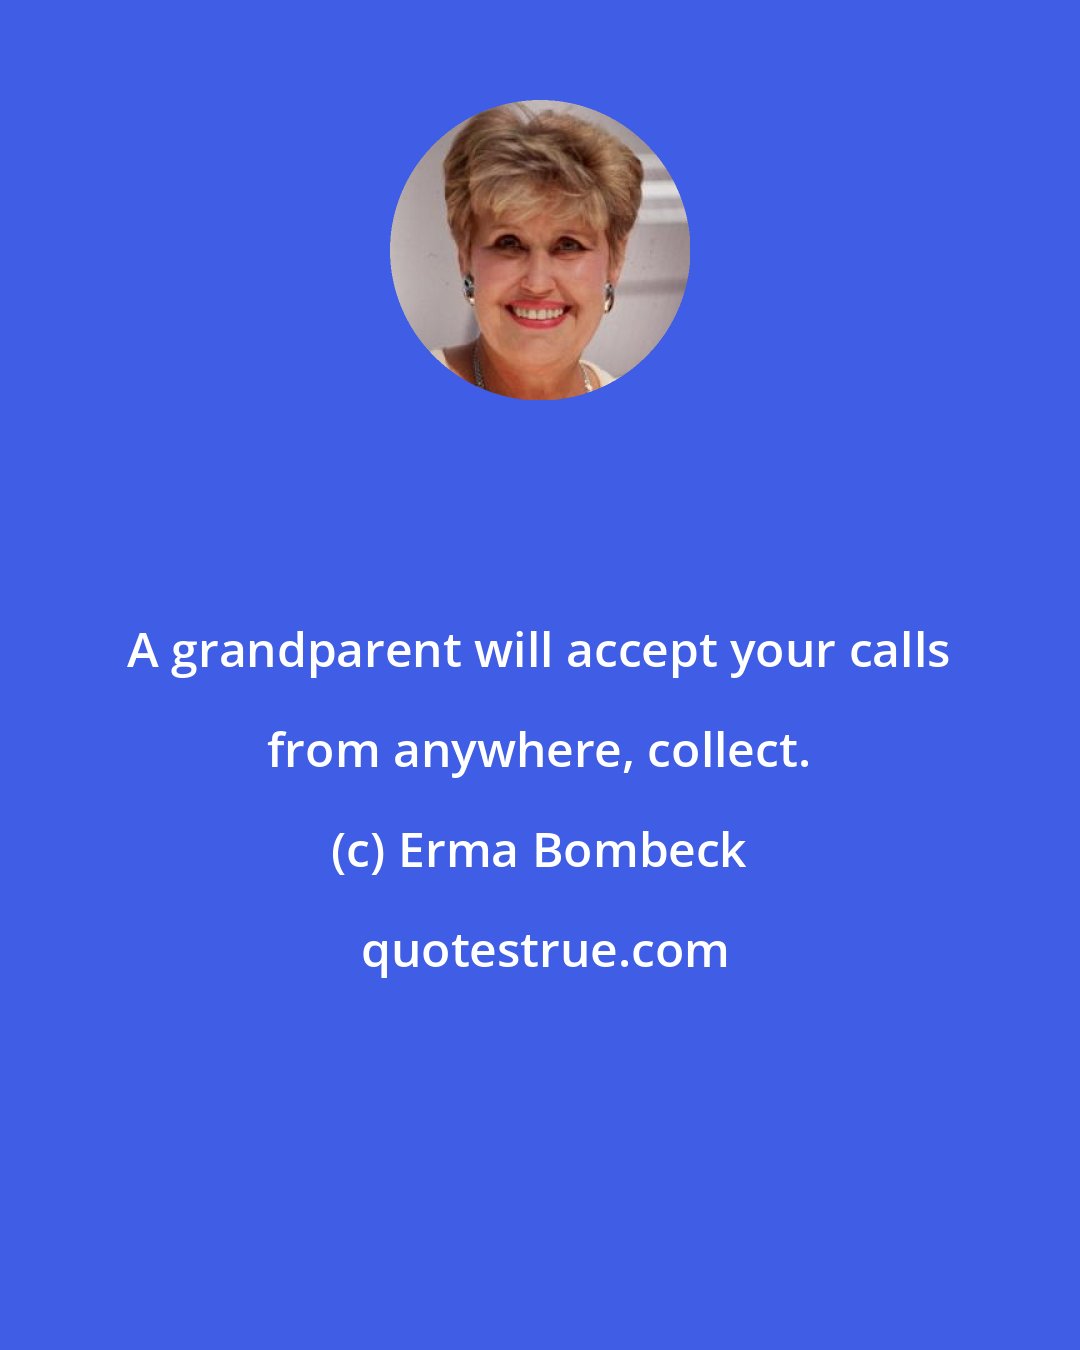 Erma Bombeck: A grandparent will accept your calls from anywhere, collect.